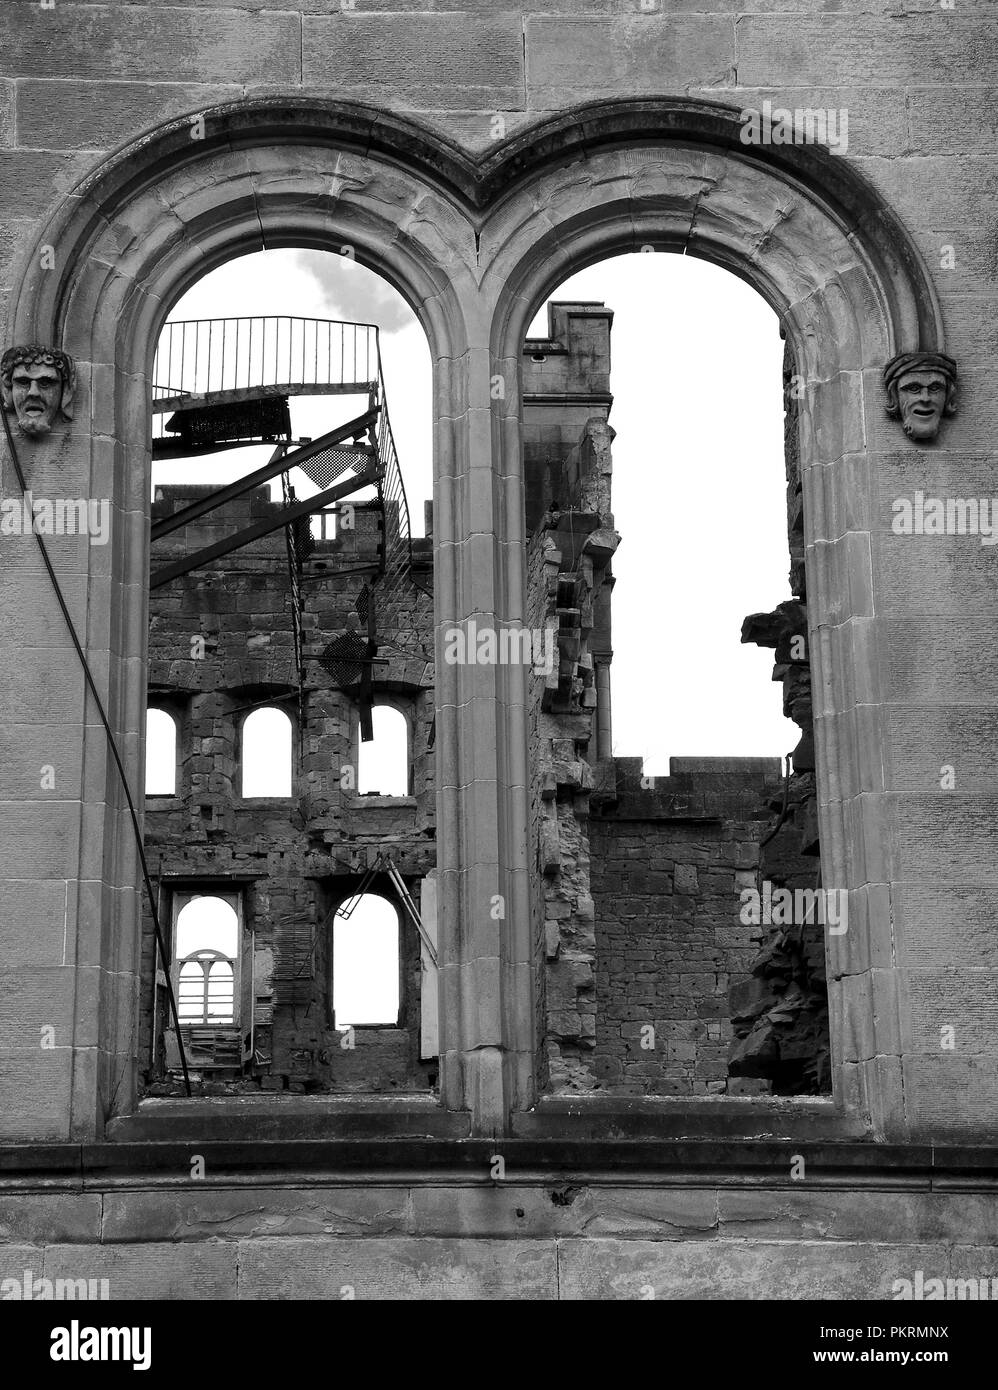 EAST DUNBARTONSHIRE, SCOTLAND -APRIL 3RD 2013: Old windows at Lennox Castle.  It was old maternity and psychiatric hospital. Stock Photo